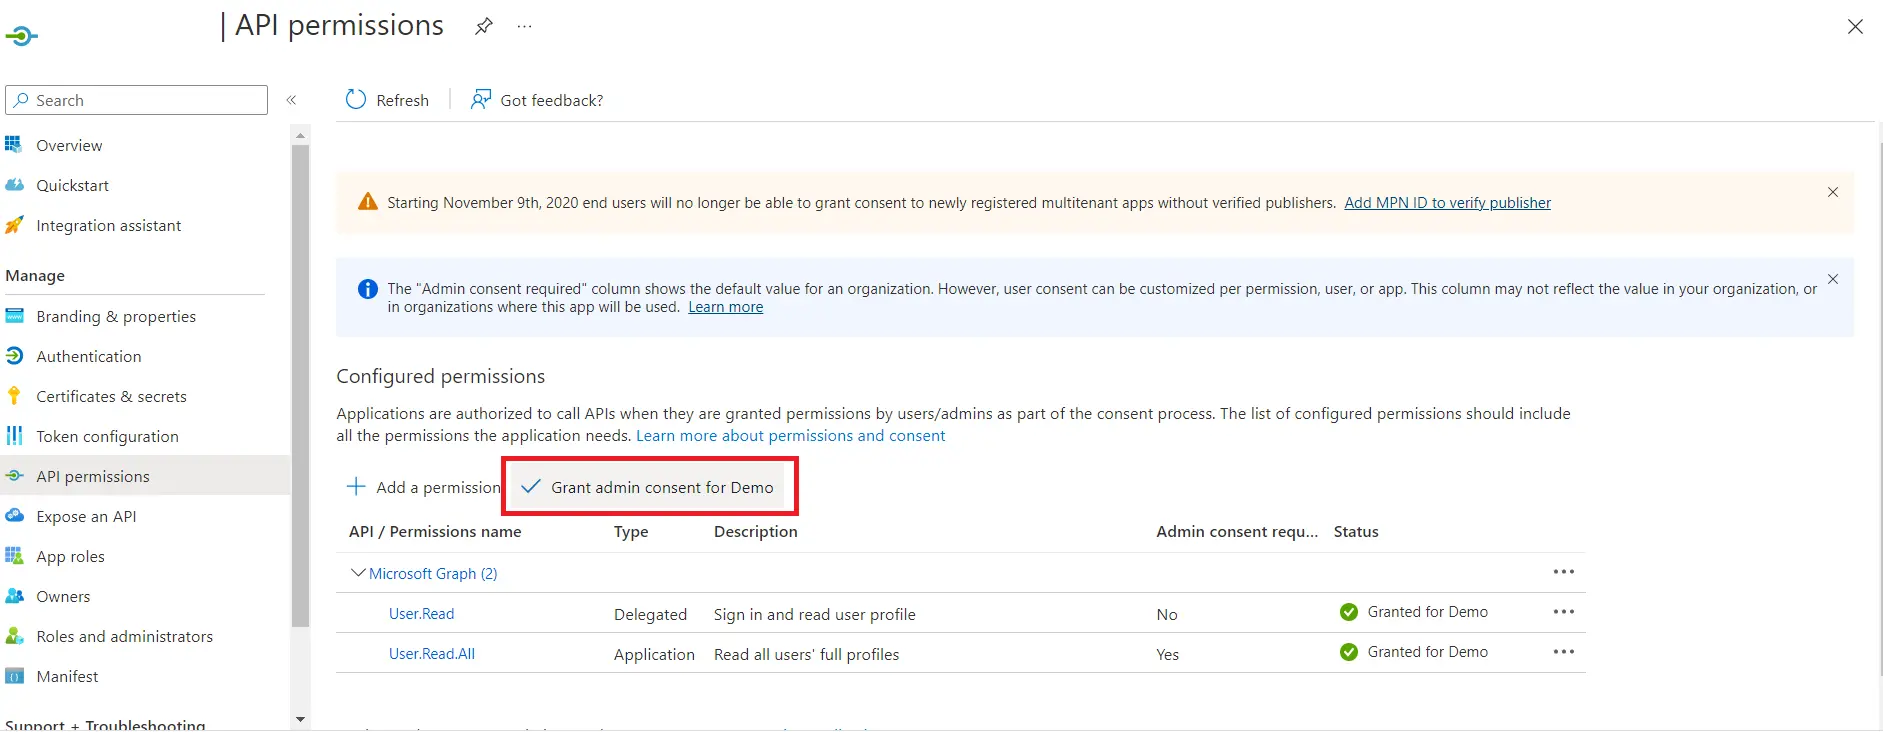 Search for required permission | WP Azure Multitenant SSO | Azure AD WP login)